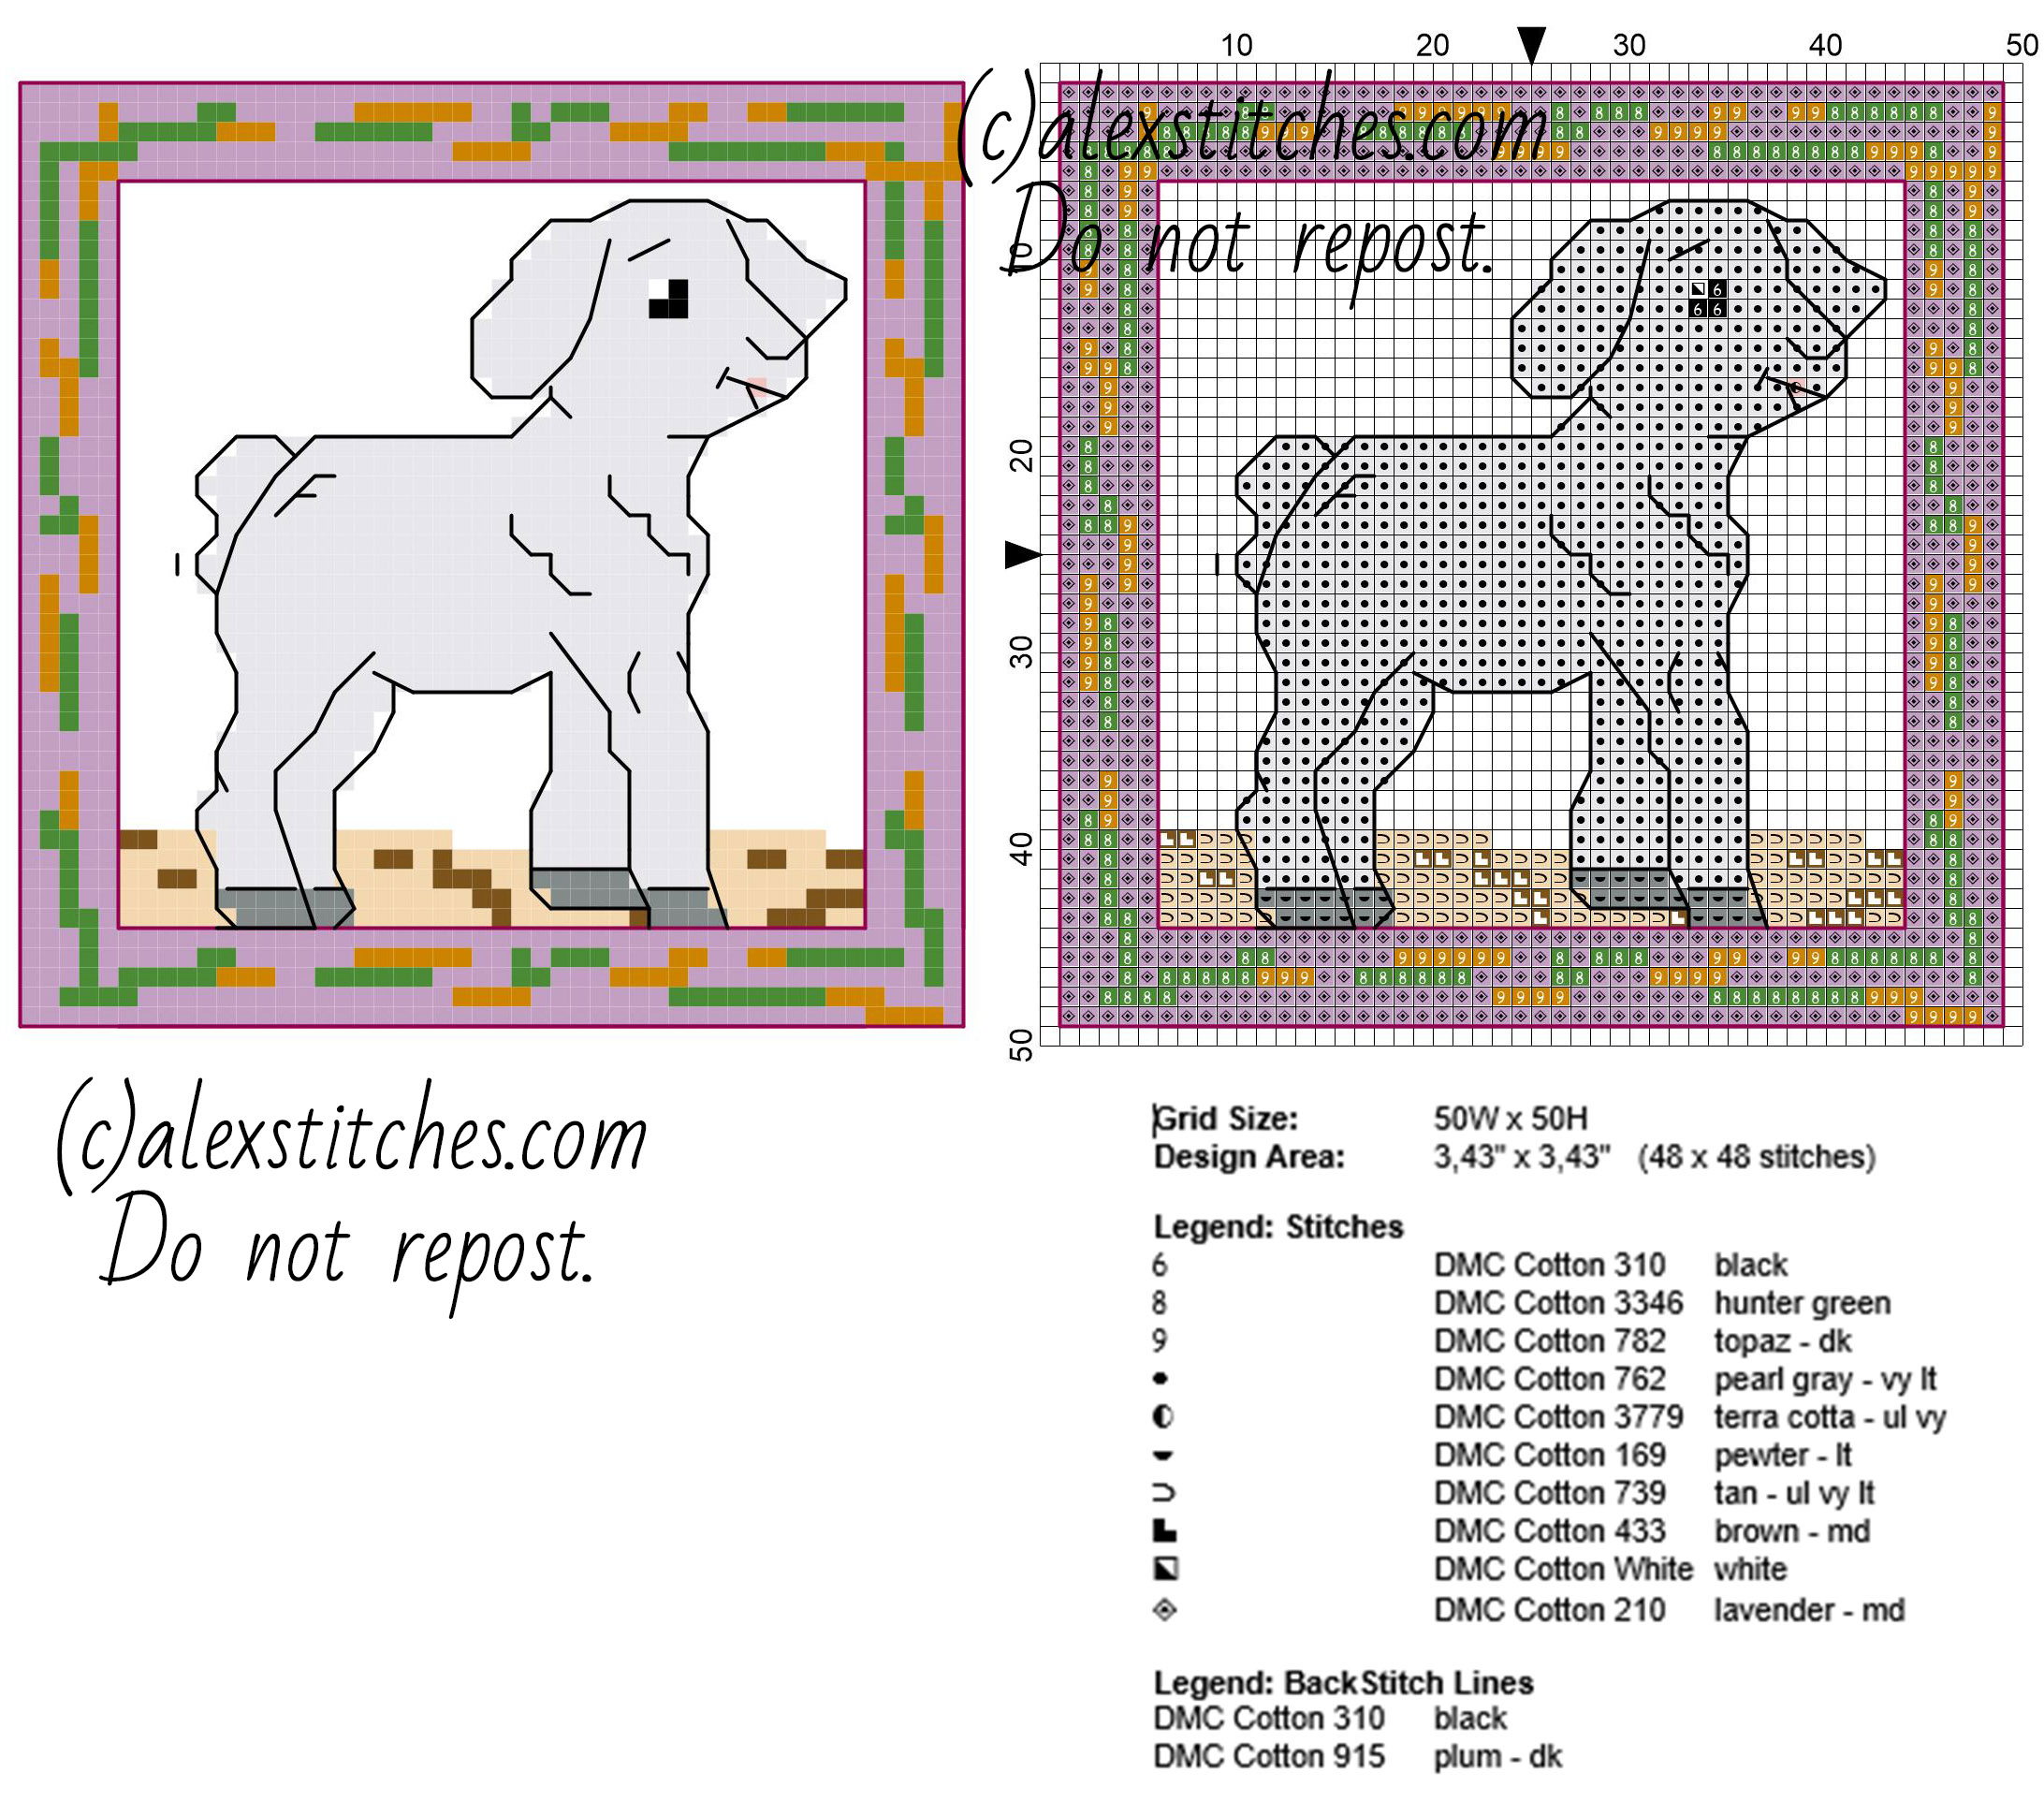 Easter card with lamb size 50 x 50 stitches free cross stitch pattern